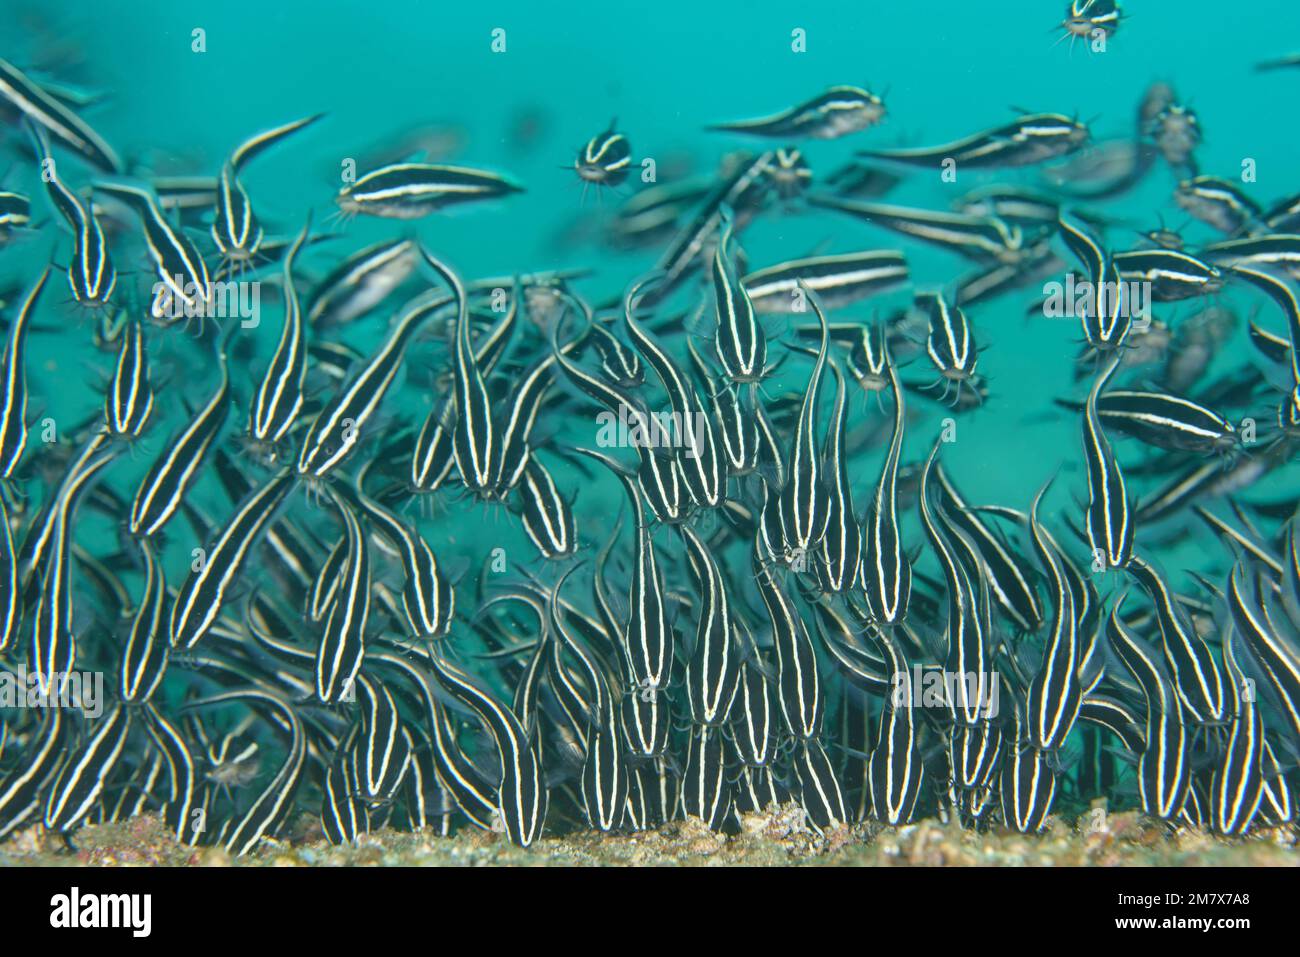 Feeding from the sea floor. Mozambique: THESE INCREDIBLE images show off a school of catfish forming a wall along the seafloor, like a cloud of fish. Stock Photo